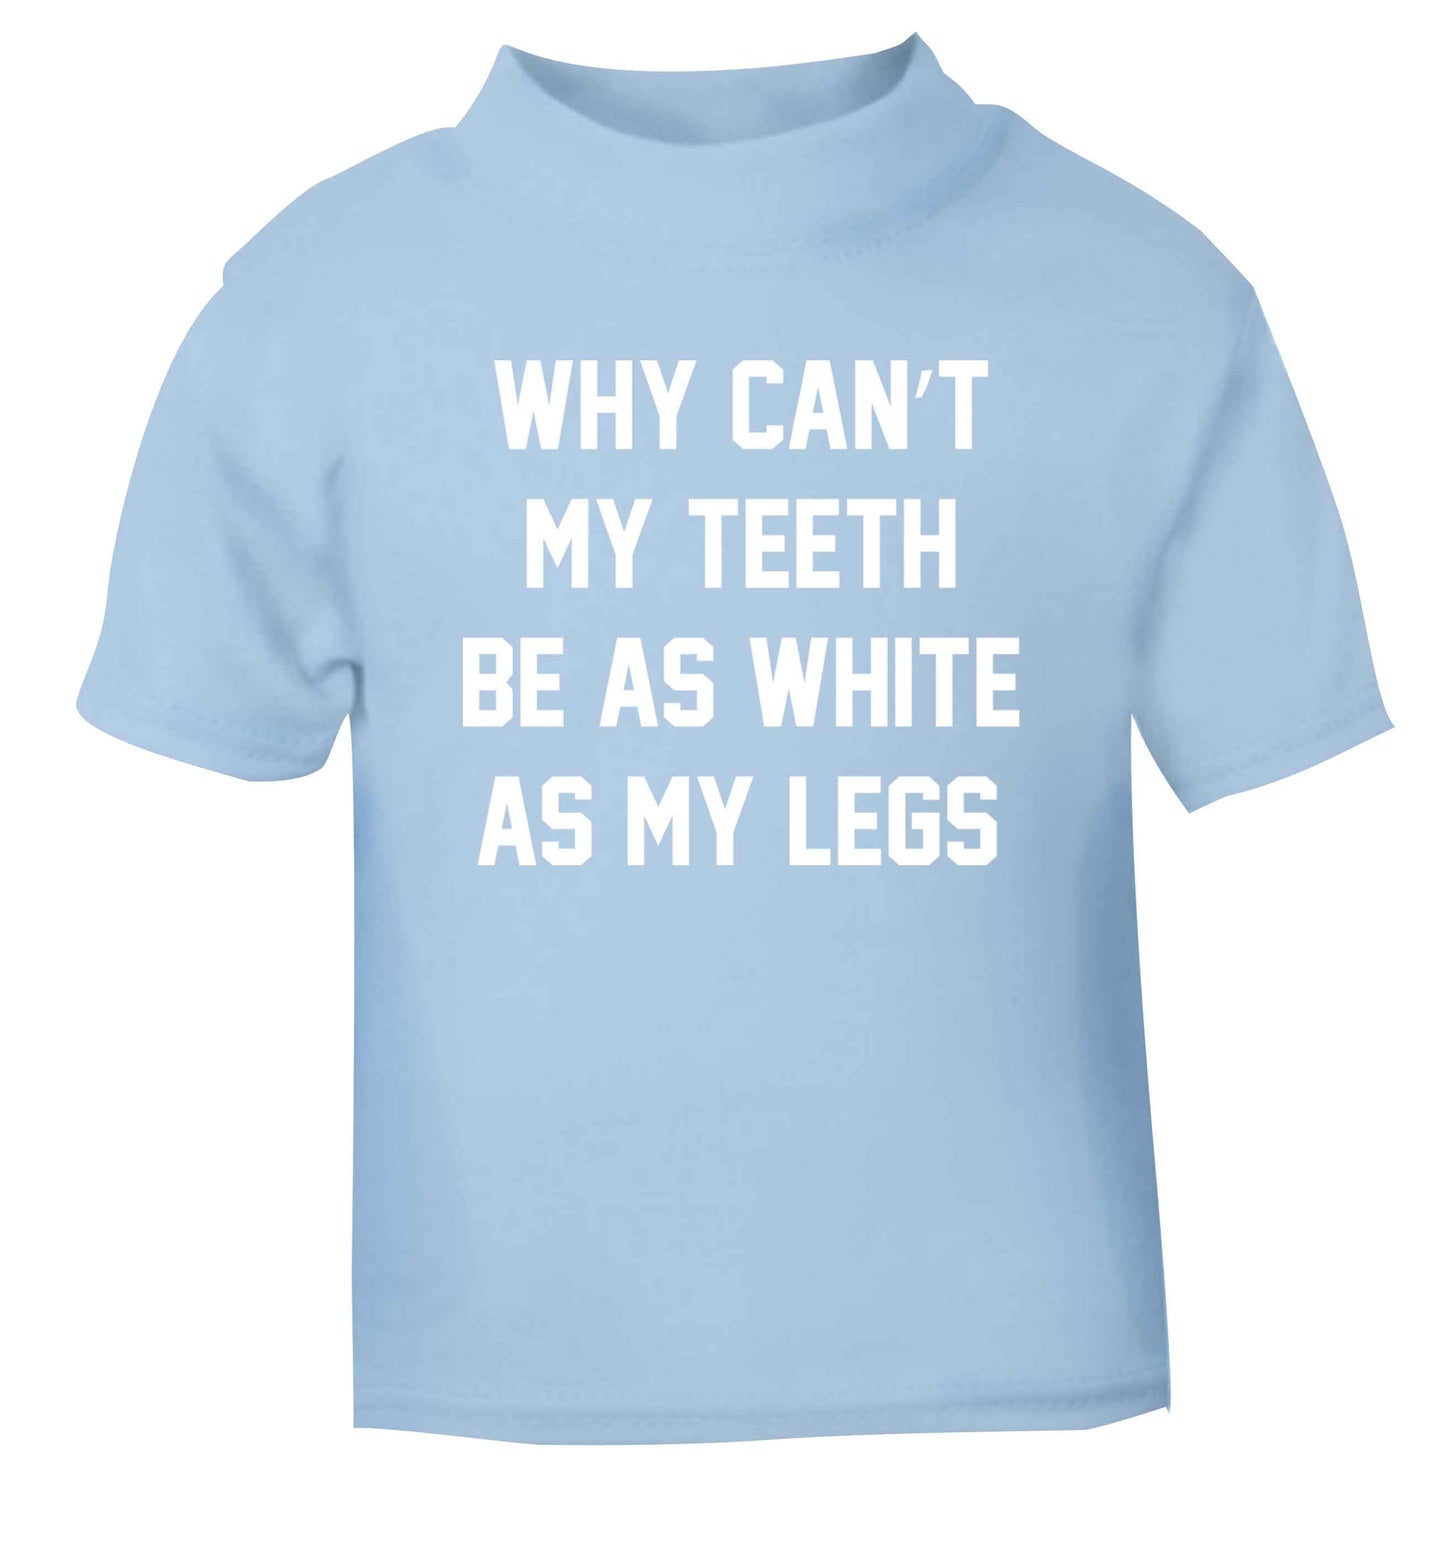 Why can't my teeth be as white as my legs light blue Baby Toddler Tshirt 2 Years